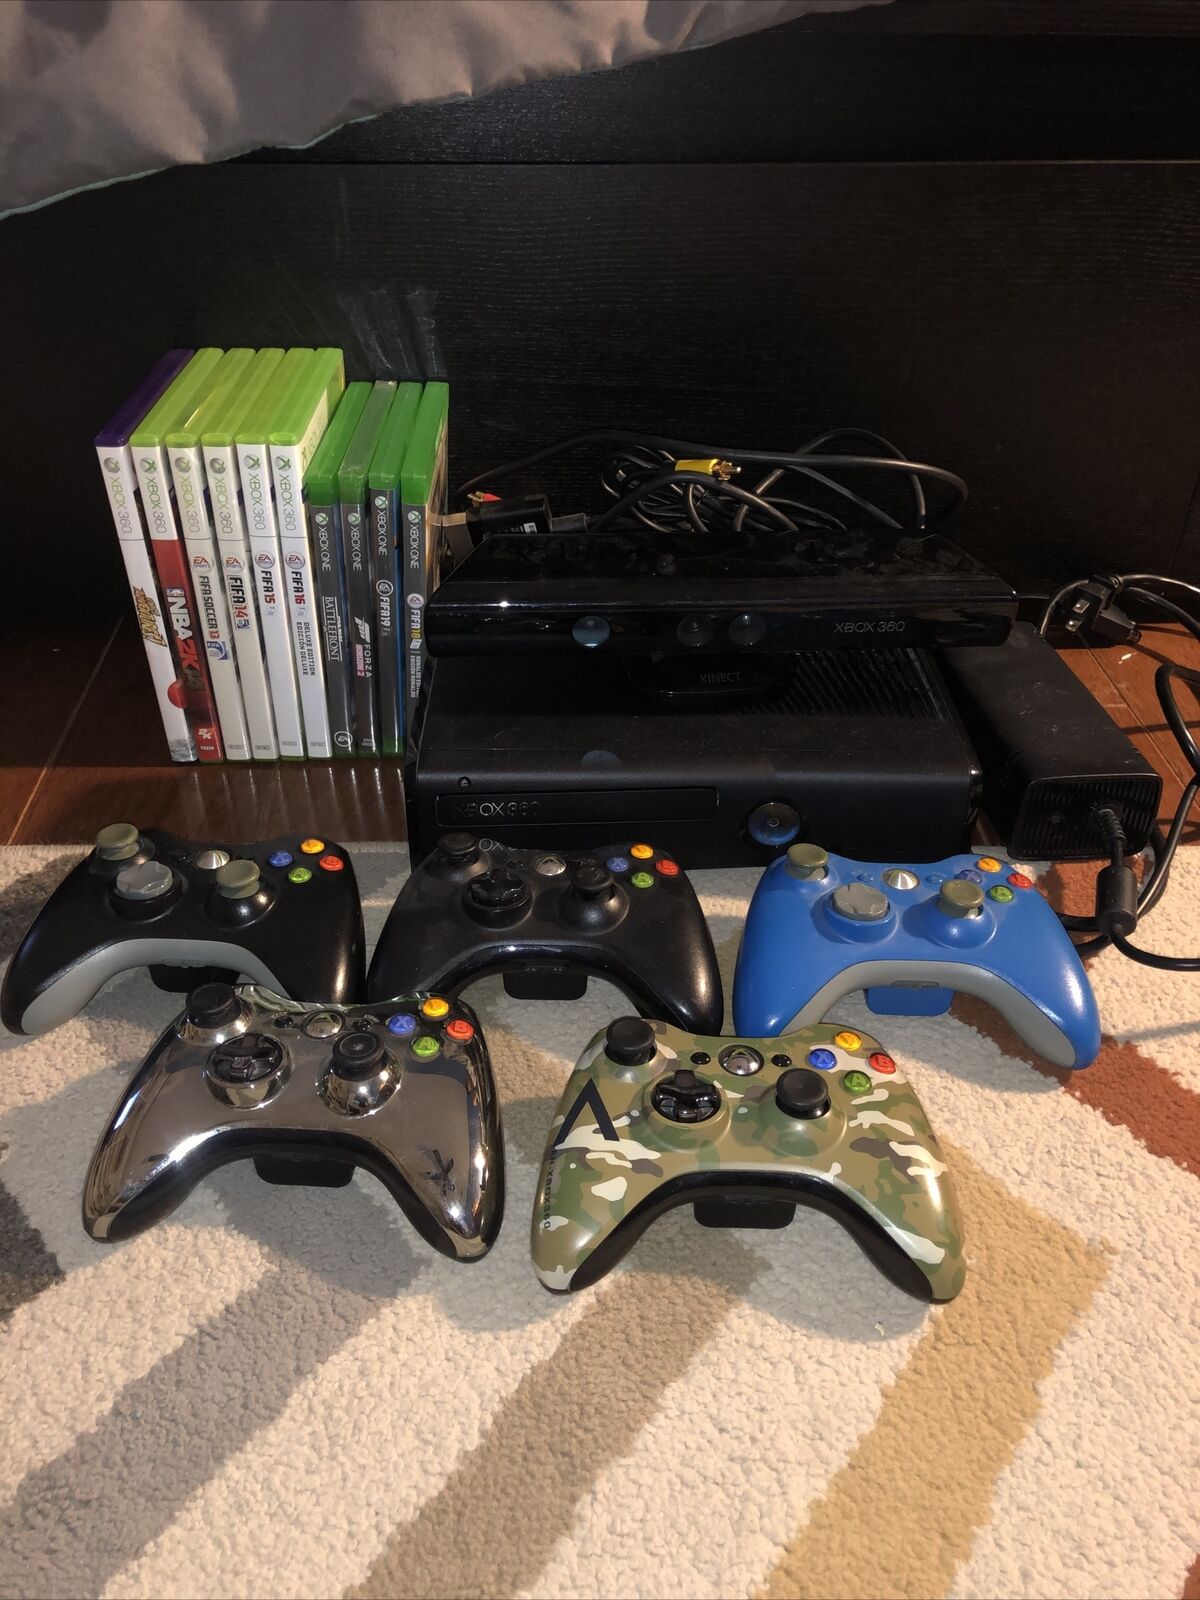 mooi zo Onbepaald vat Xbox 360 4 GB Black Console all chords, 5 Controllers, Kinect, 10 Games  Bundle 12305142262 | eBay